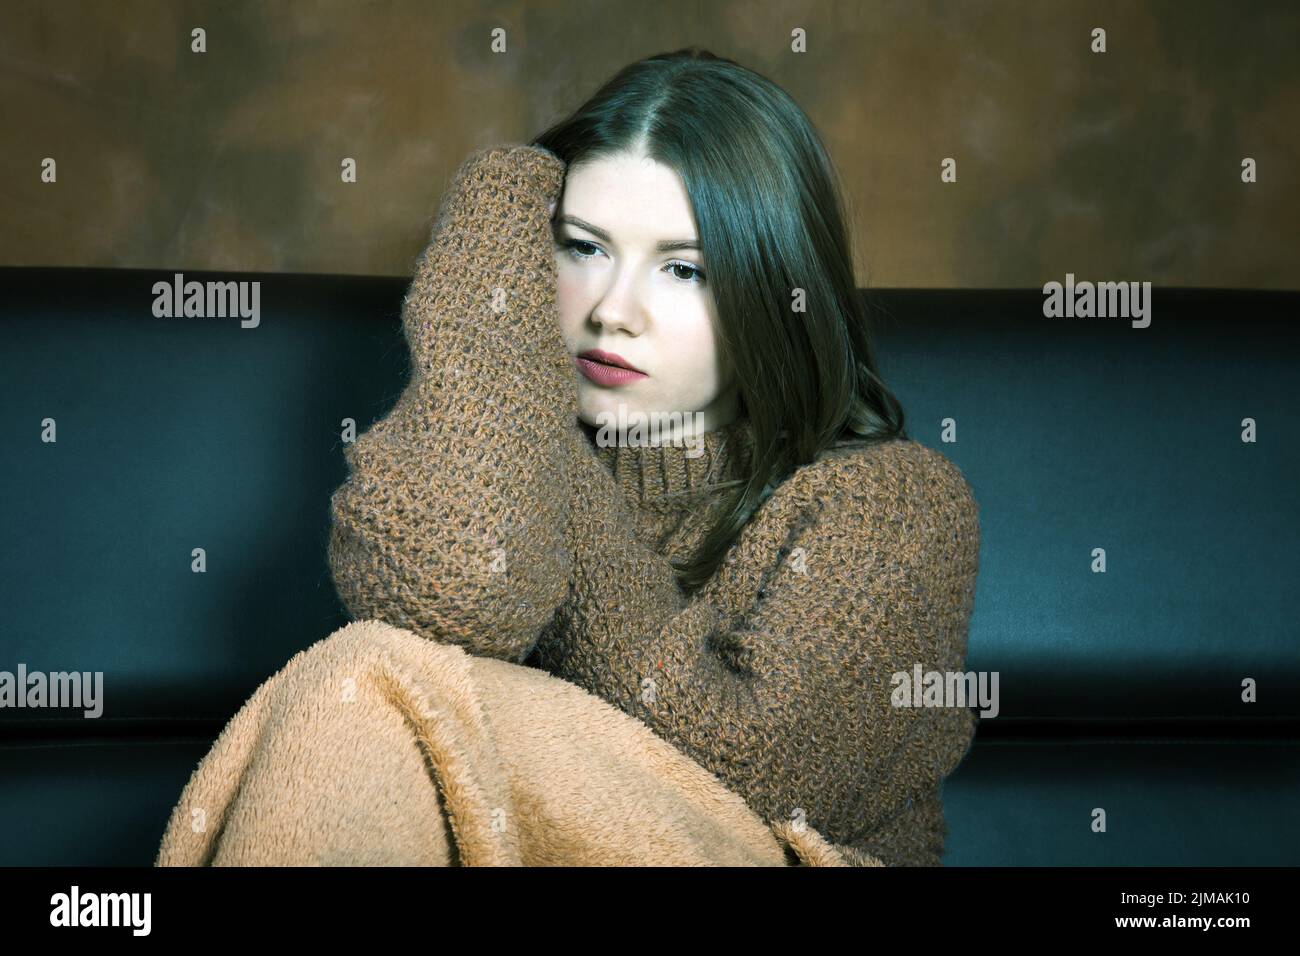 Girl in a sweater sits on the couch wrapped up in a rug Stock Photo